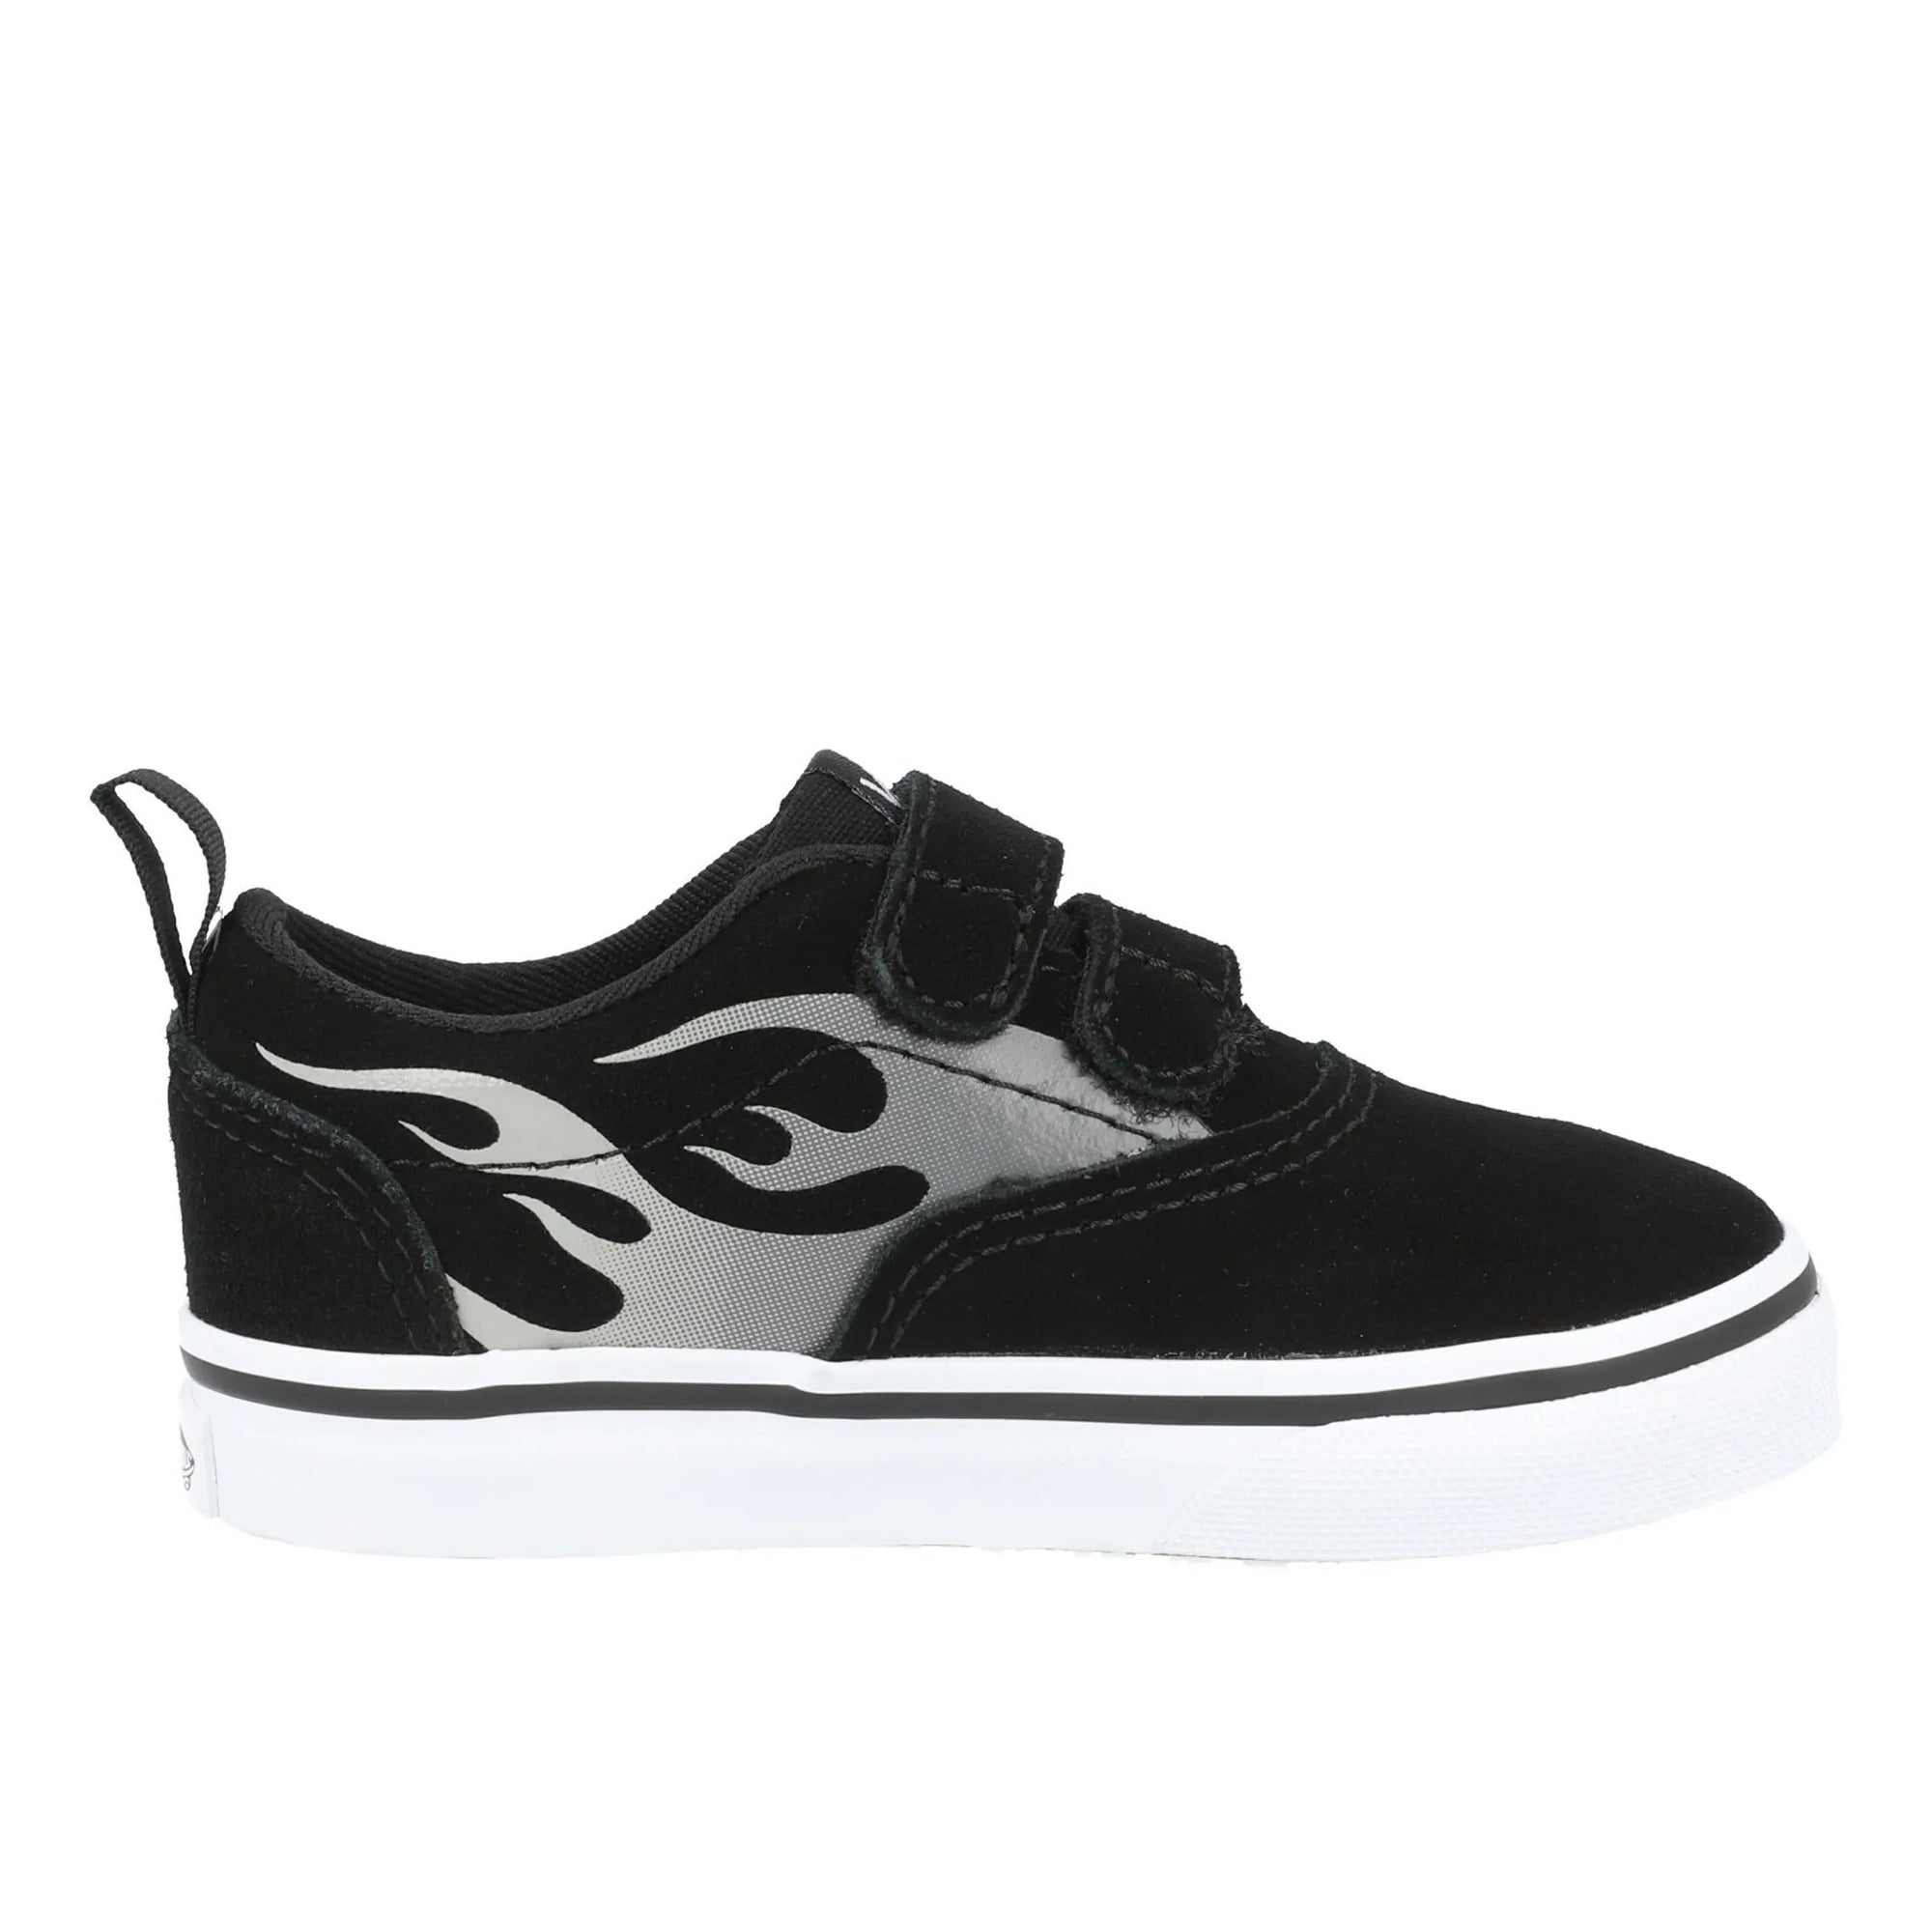 Vans Toddler Doheny Suede Flame Vn0a4tzm3rv1 Footwear UK4 INFANT / Black,UK5 INFANT / Black,UK6 INFANT / Black,UK7 INFANT / Black,UK8 INFANT / Black,UK9 KIDS / Black